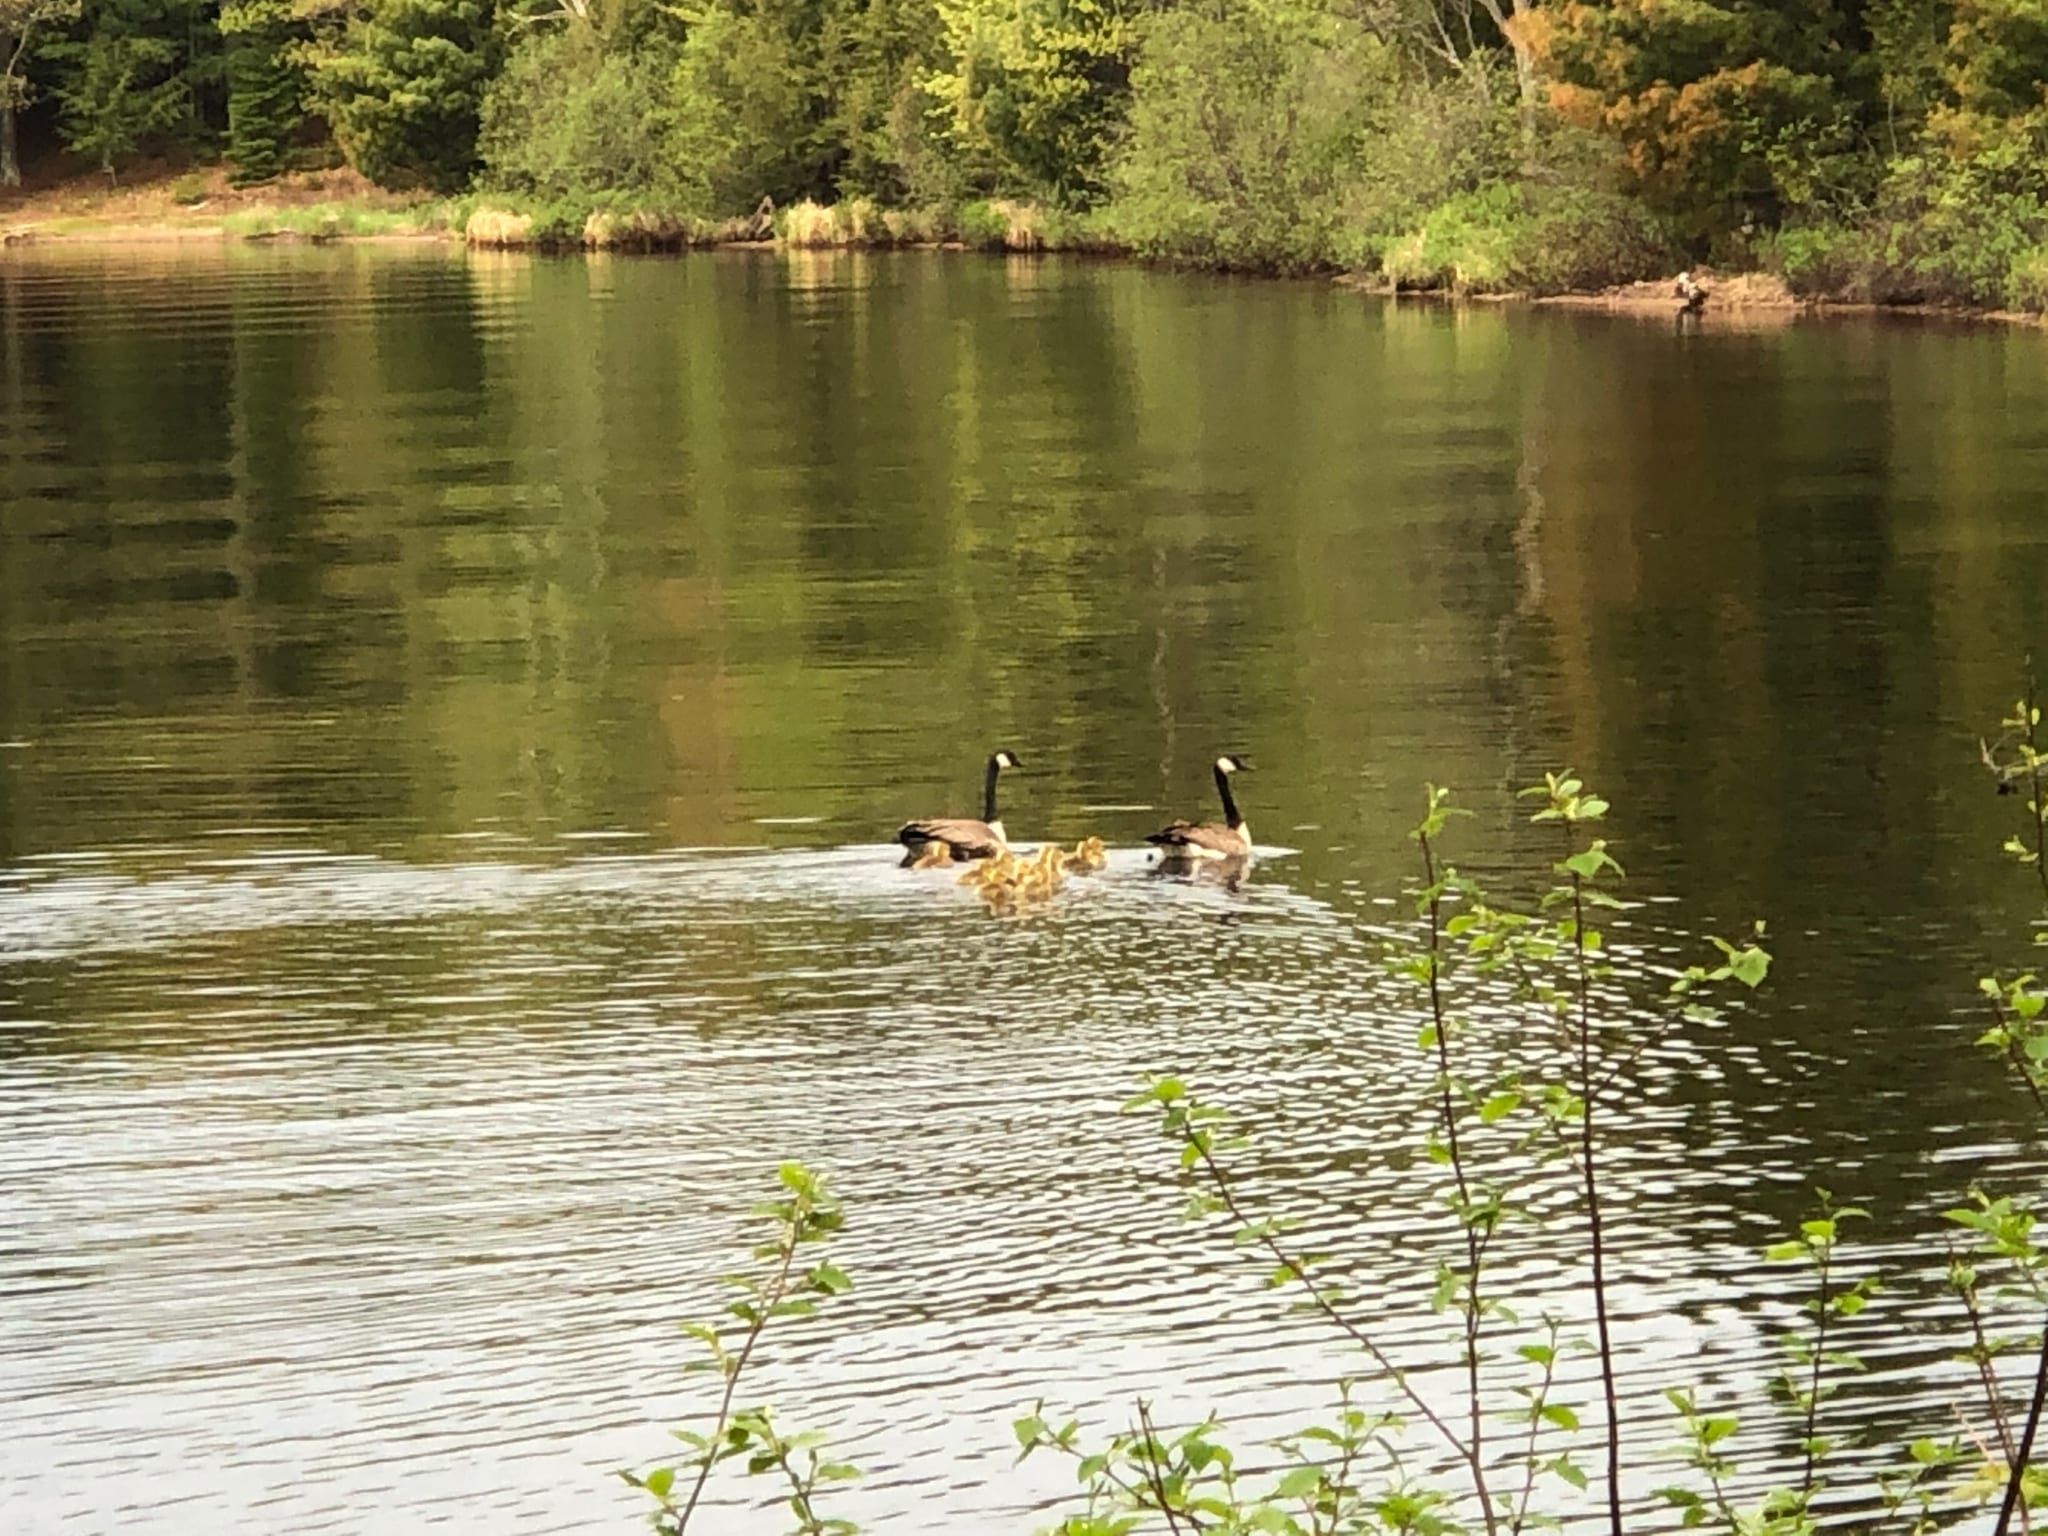 Canadian geese on the lake.